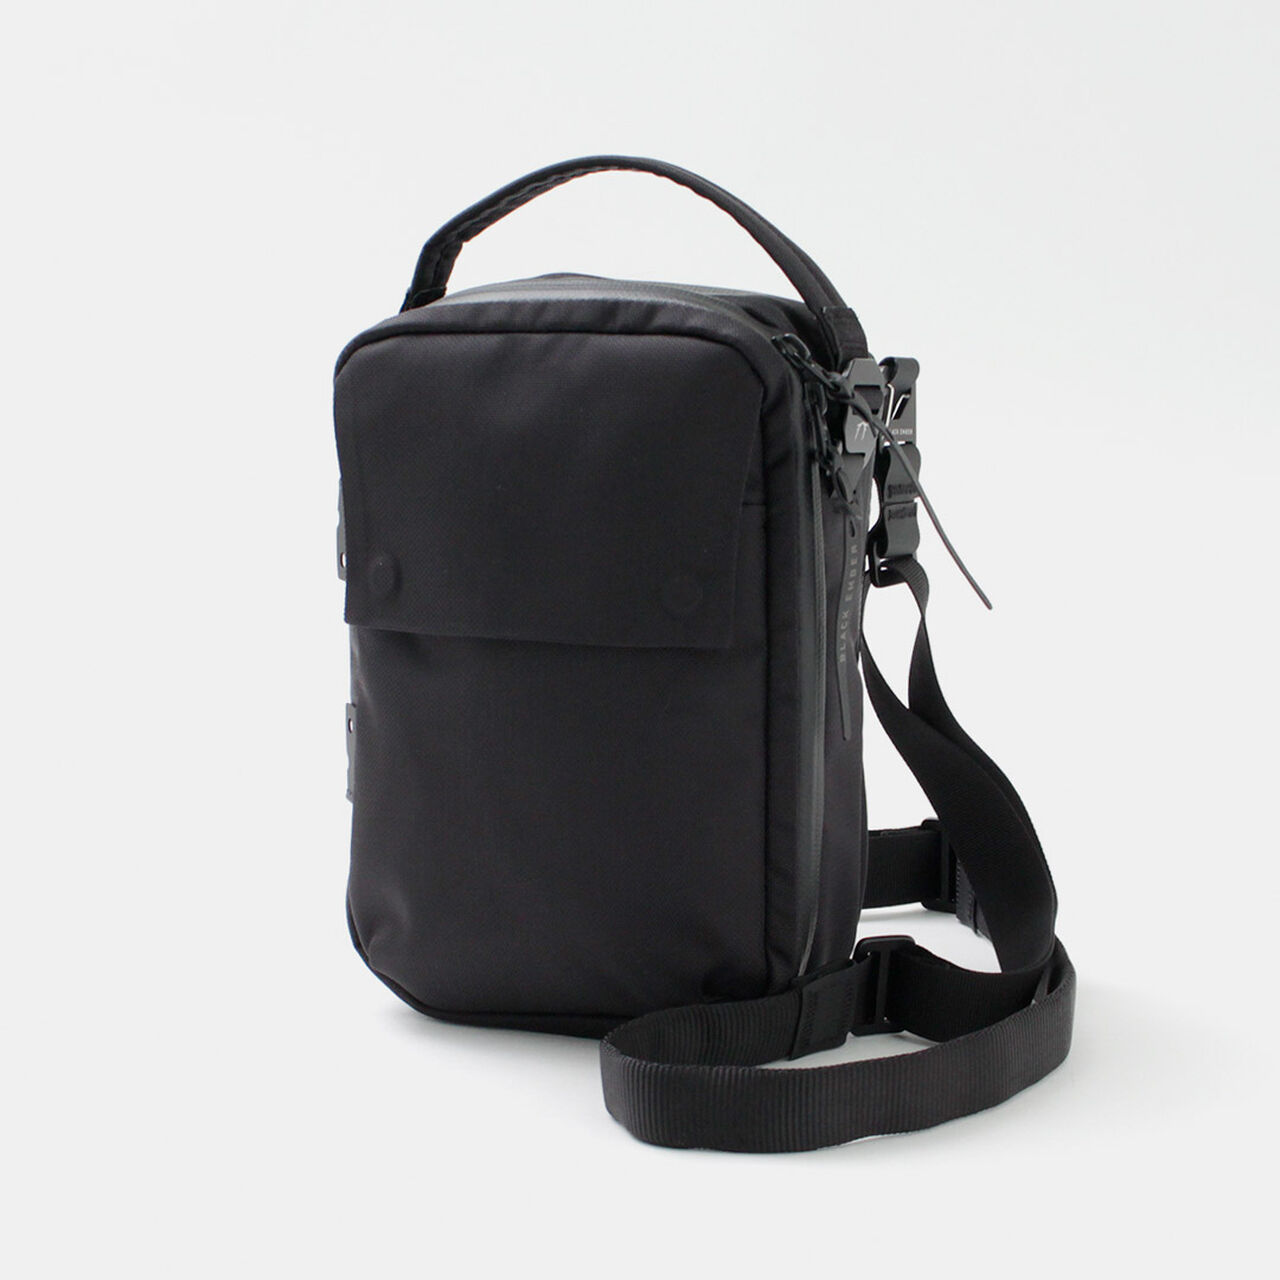 Double Gusset Crossbody Bag - A New Day™ Black